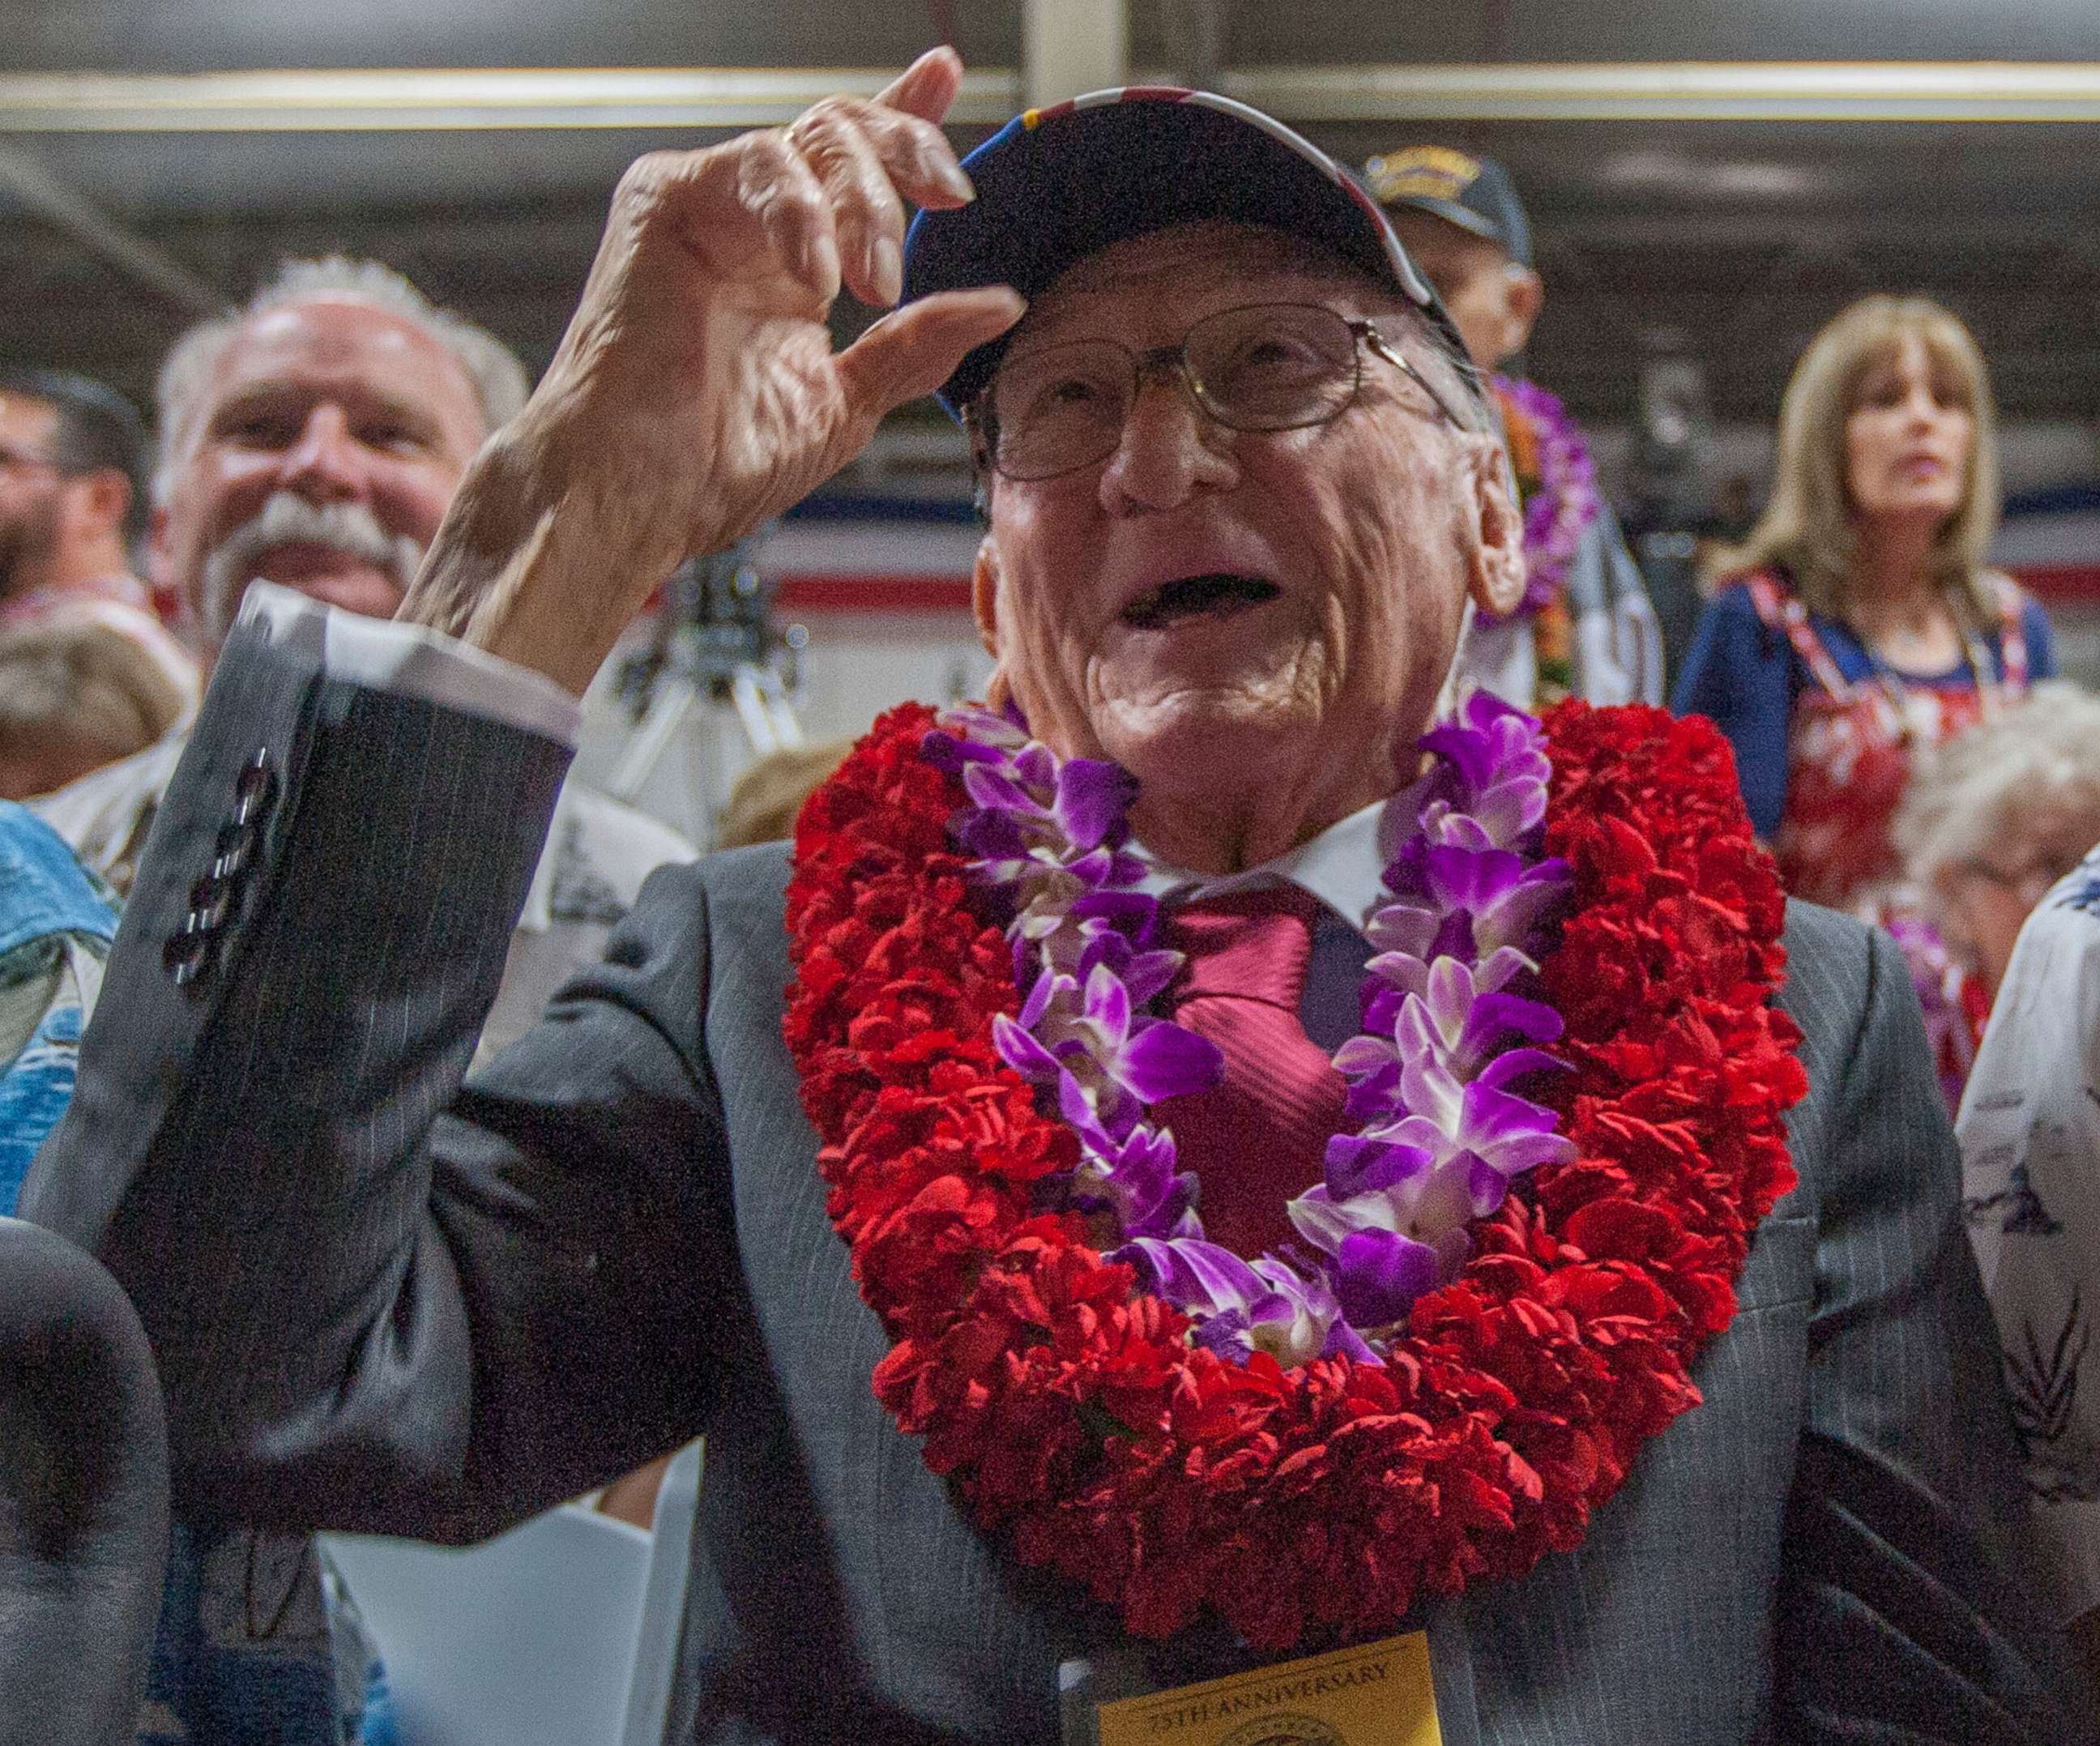 PHOTO: In this file photo taken on Dec. 7, 2016, USS Arizona survivor Donald Stratton, center, acknowledges a friend at Kilo Pier next to the World War II Valor in the Pacific National Monument at Joint Base Pearl Harbor-Hickam in Honolulu, Hawaii.